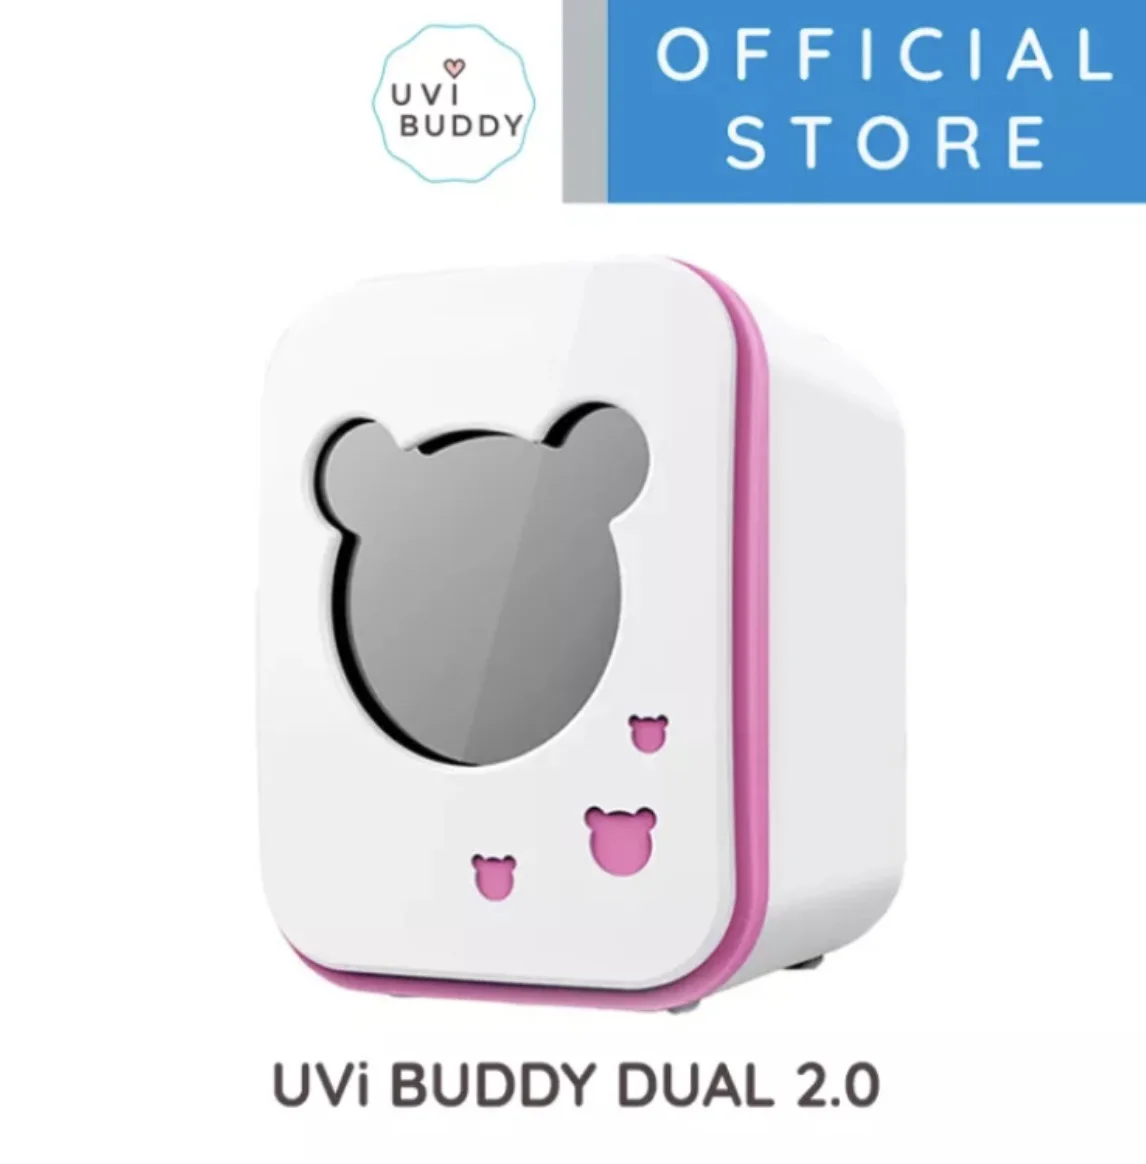 Dual Lamp UVi Buddy UV Sterilizer and Dryer 16L Disinfection Cabinet (Pink) - DUAL 2.0